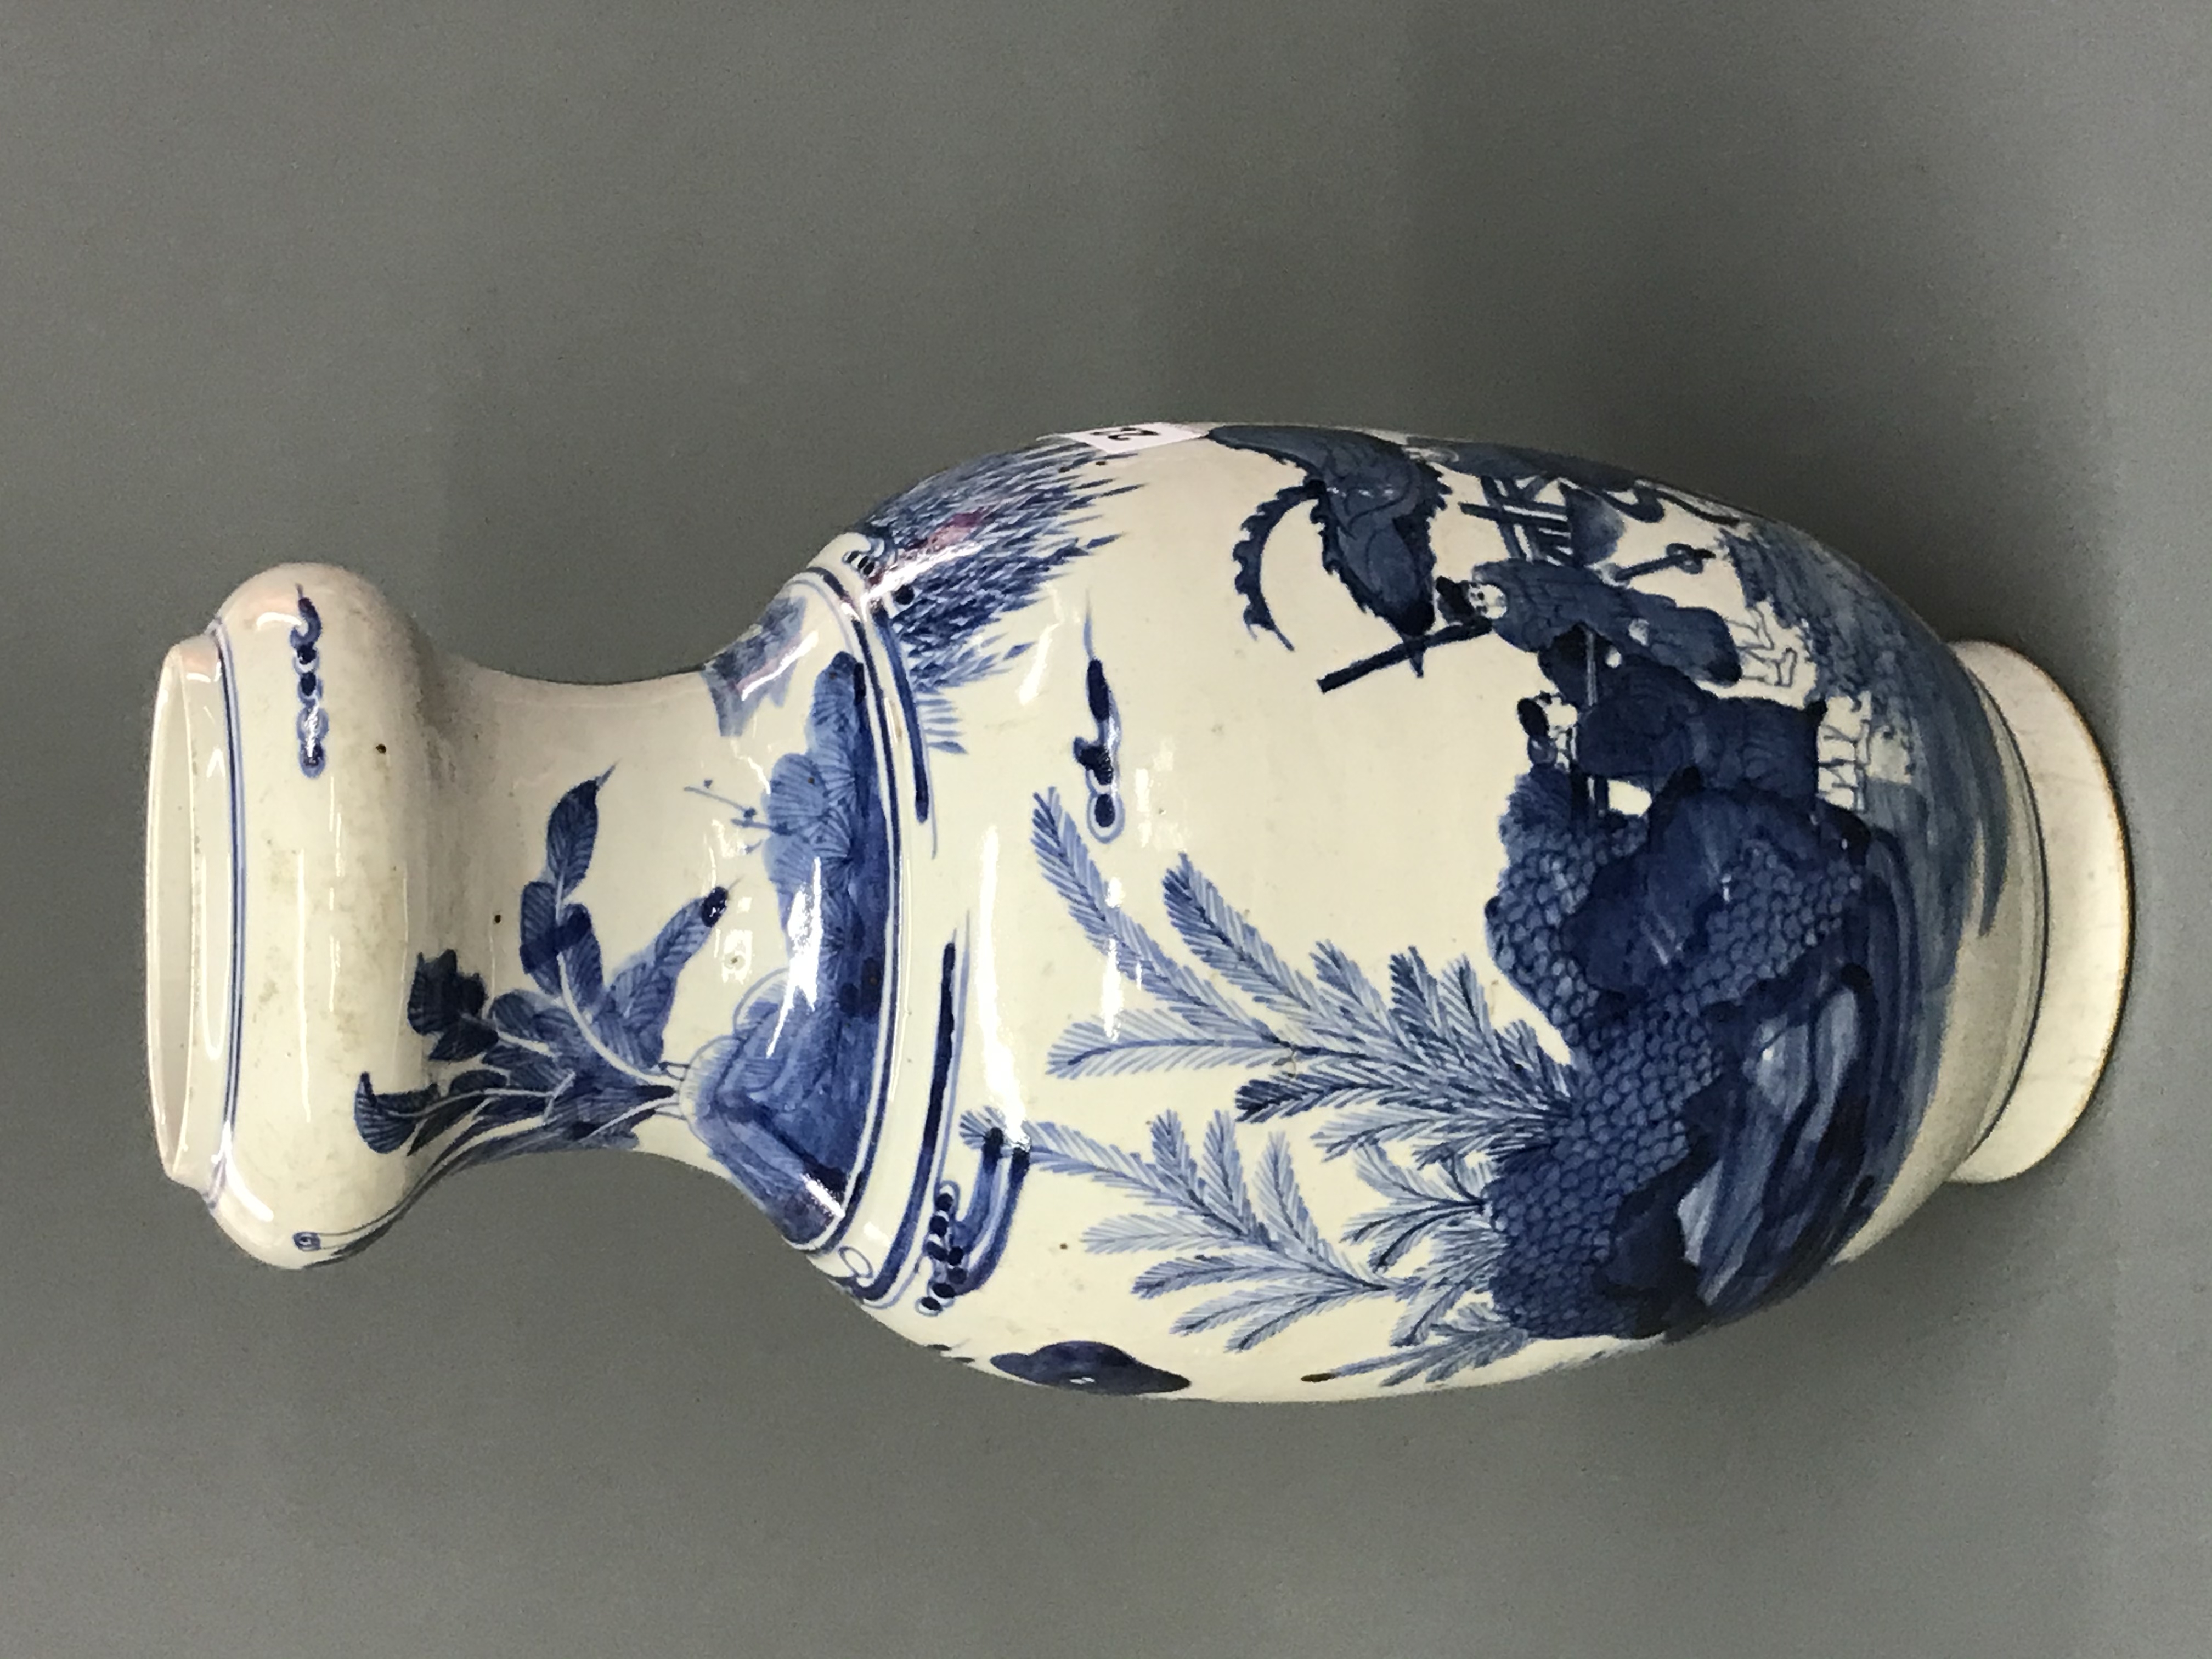 A Chinese hand painted porcelain vase with narrowed neck and decoration of an Emperor and advisers - Image 3 of 6